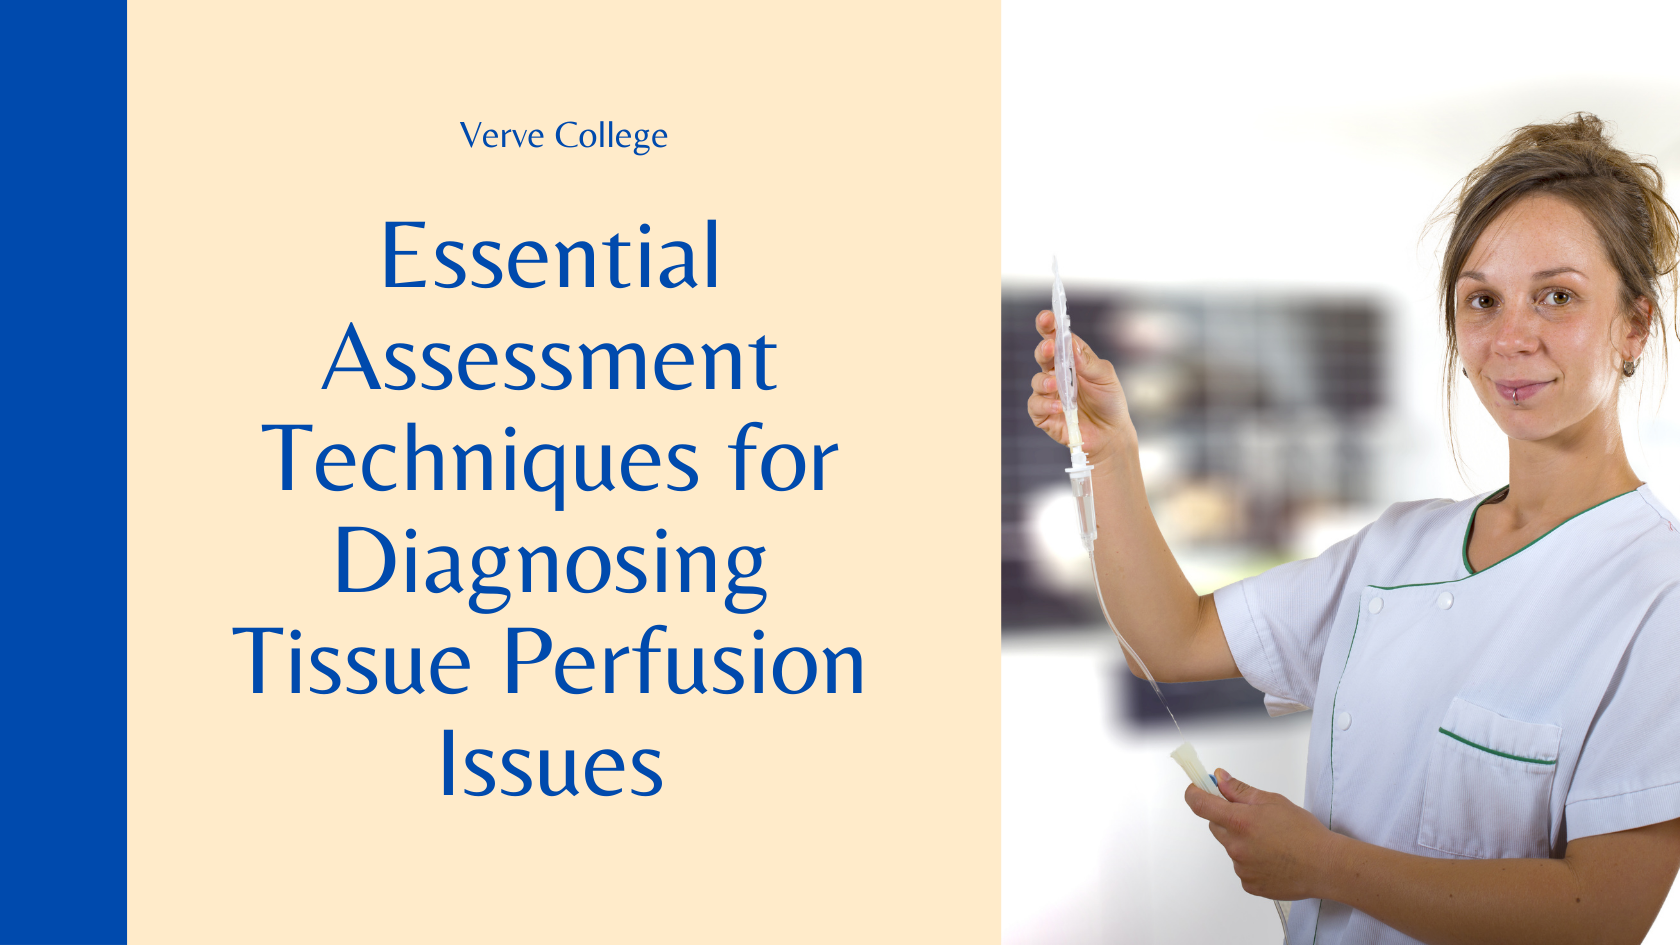 Essential Assessment Techniques for Diagnosing Tissue Perfusion Issues